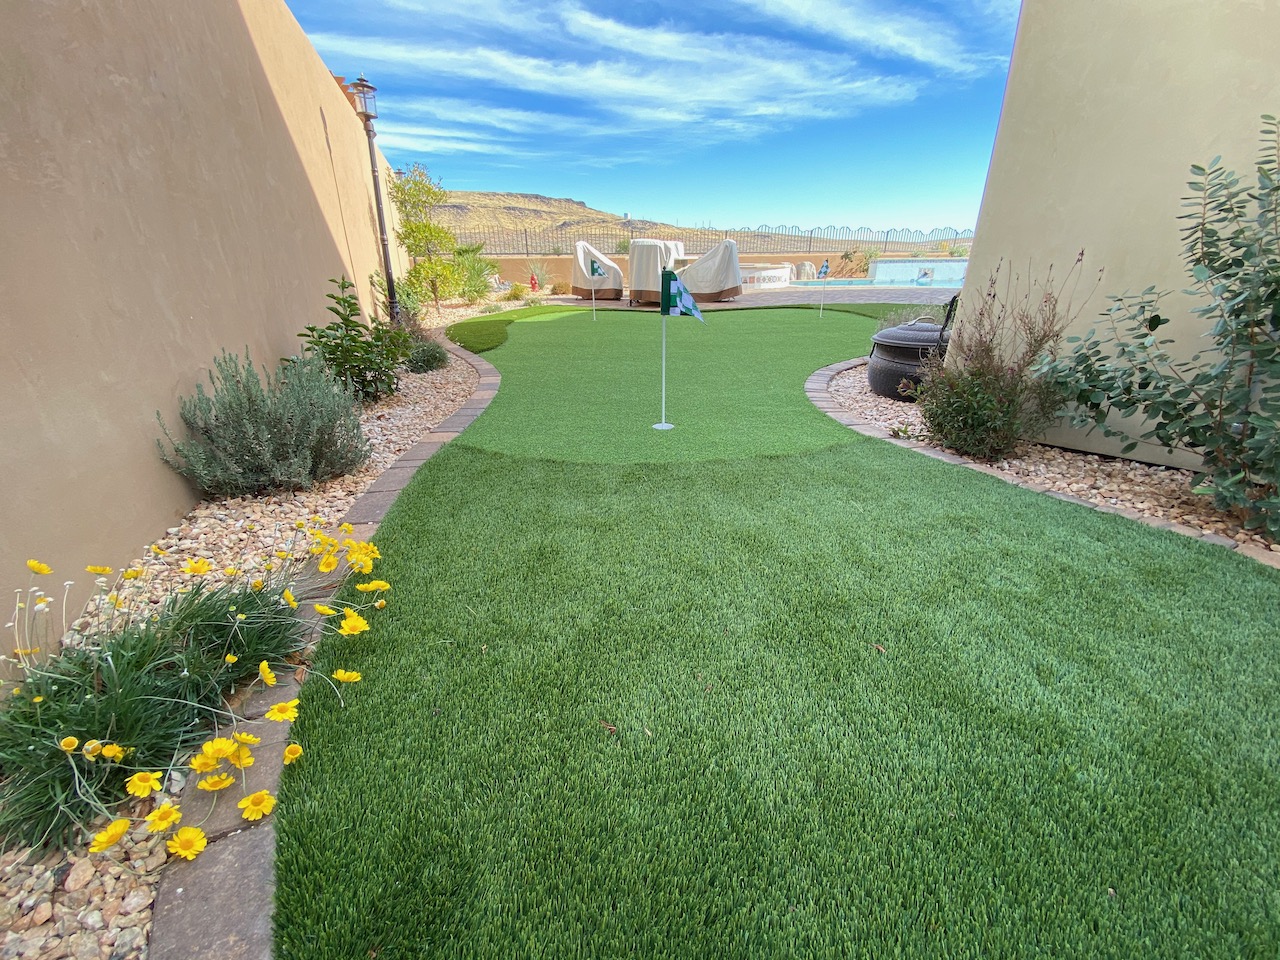 Ledges Putting Green True Roots, St George Landscaping Plants